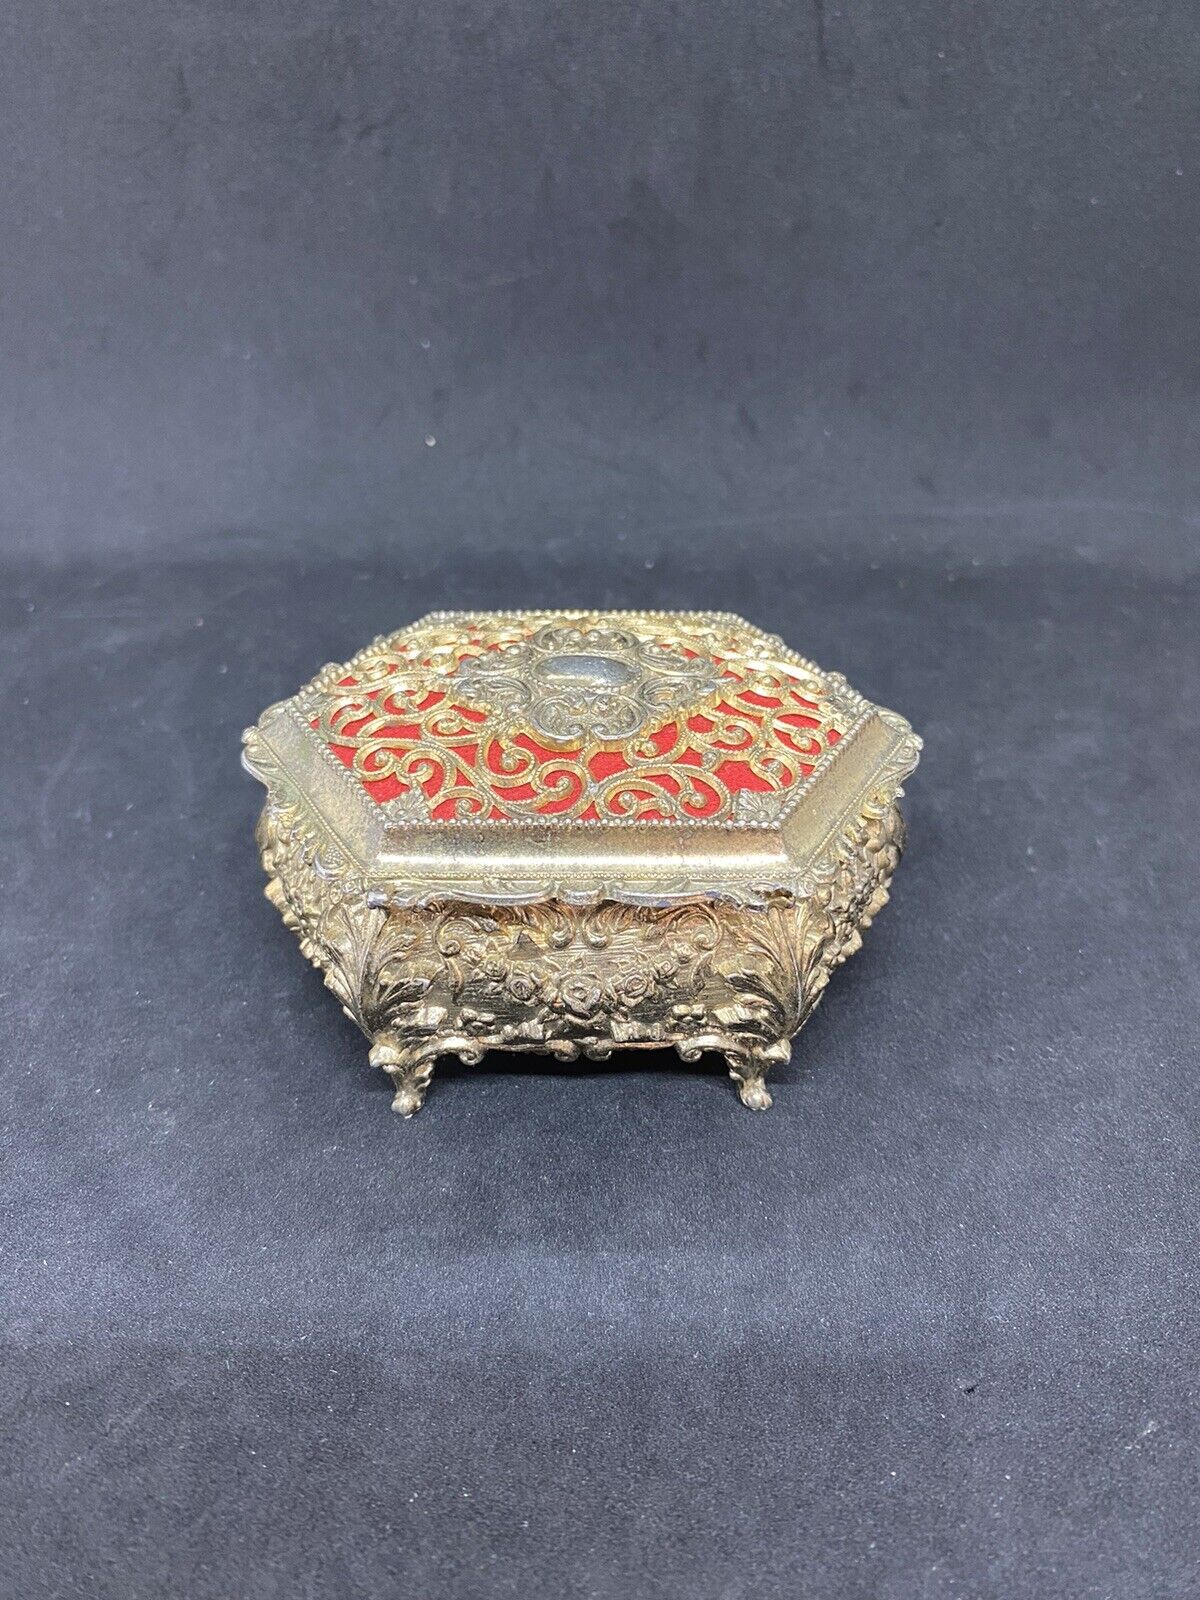 Vintage Collectible Footed Jewelry Trinket Box with Felt Inlay Japan Gold Tone